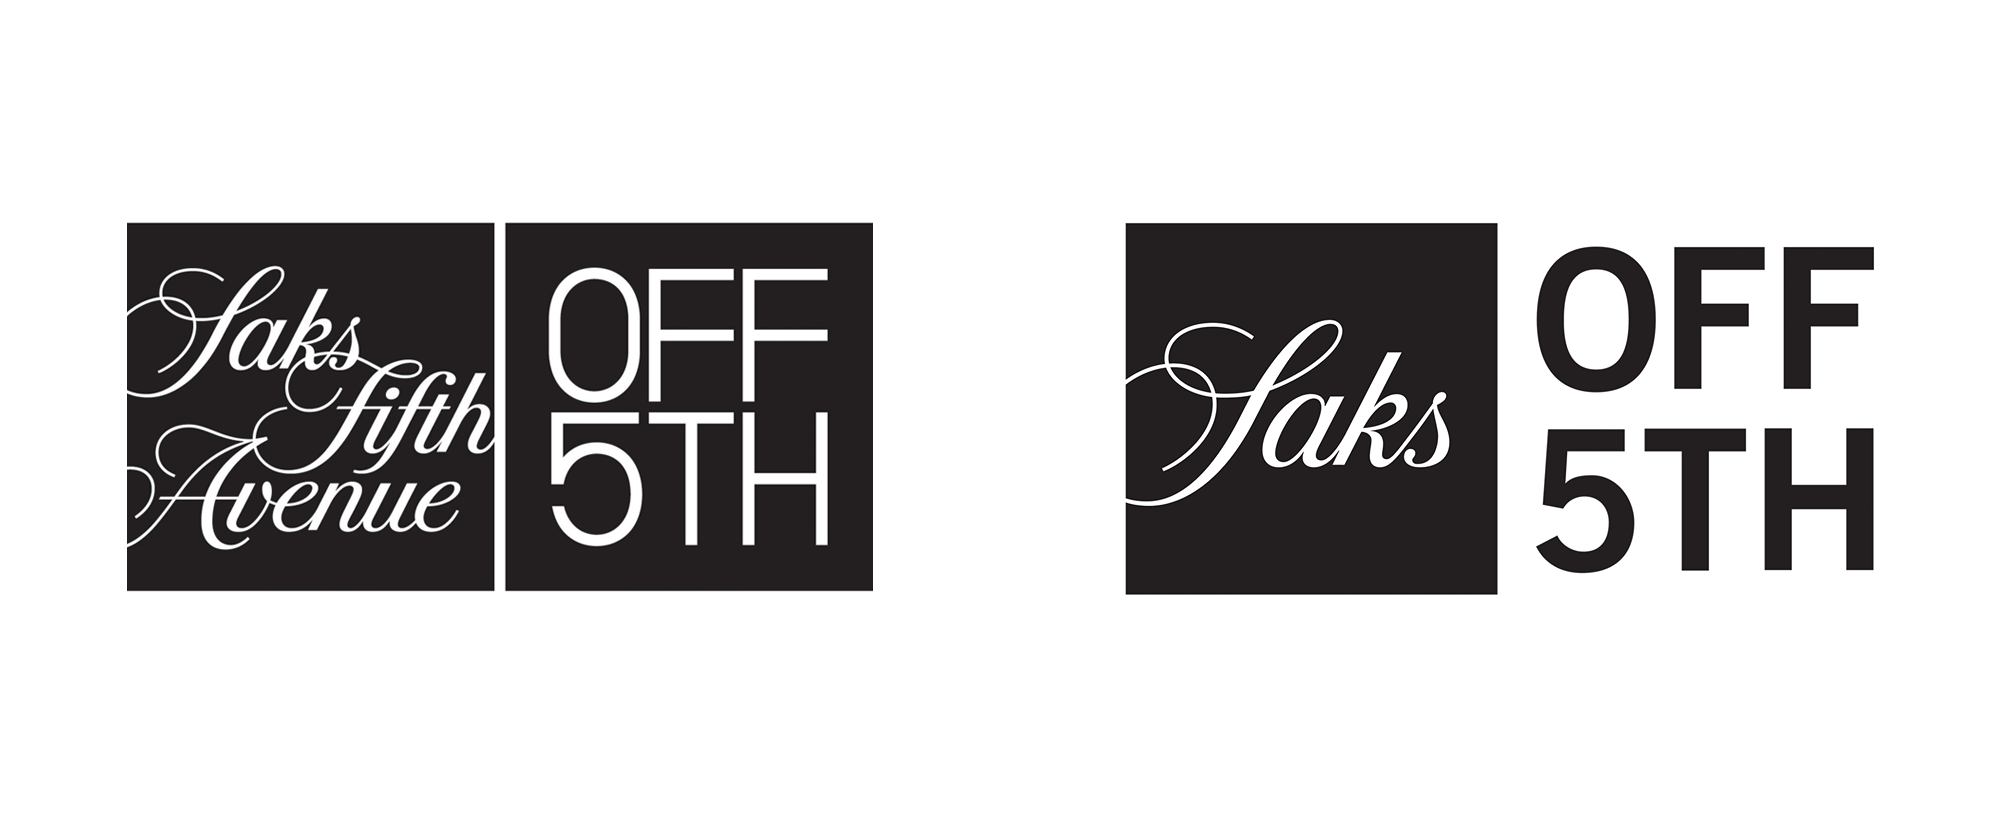 Download Saks Fifth Avenue Logo PNG And Vector (PDF, SVG, Ai, EPS) Free ...